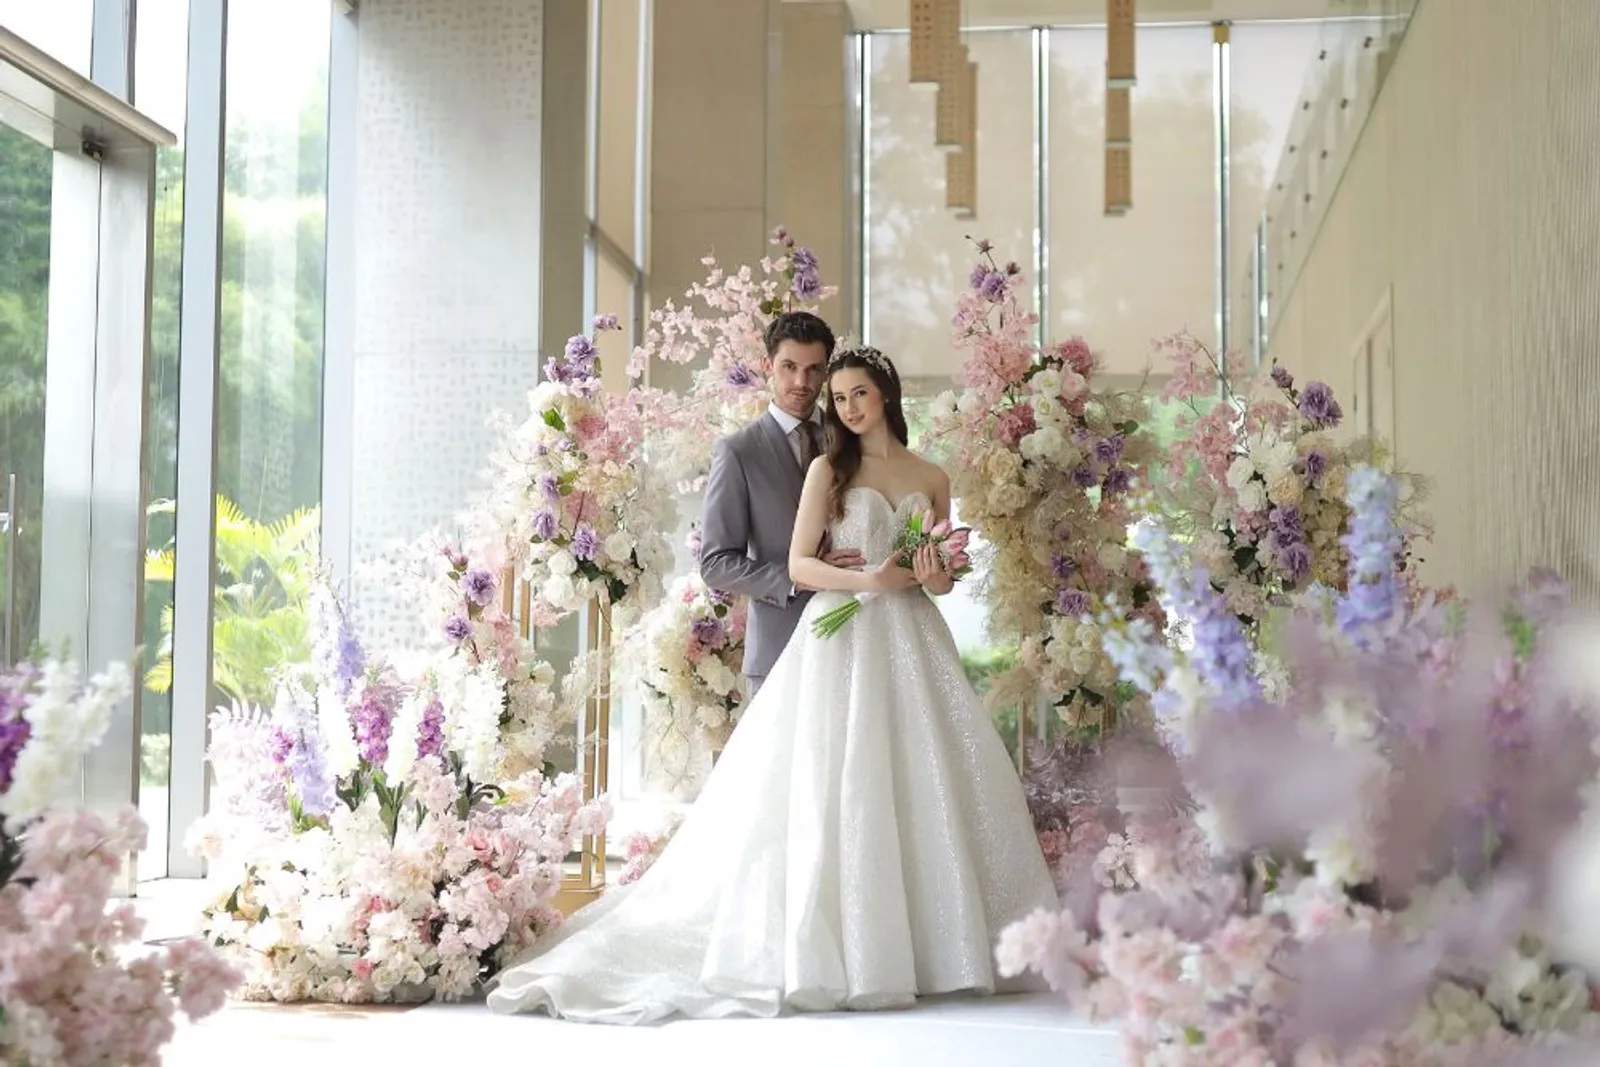 The Vow with Hilton Wedding Showcase by Bridestory Kembali Digelar